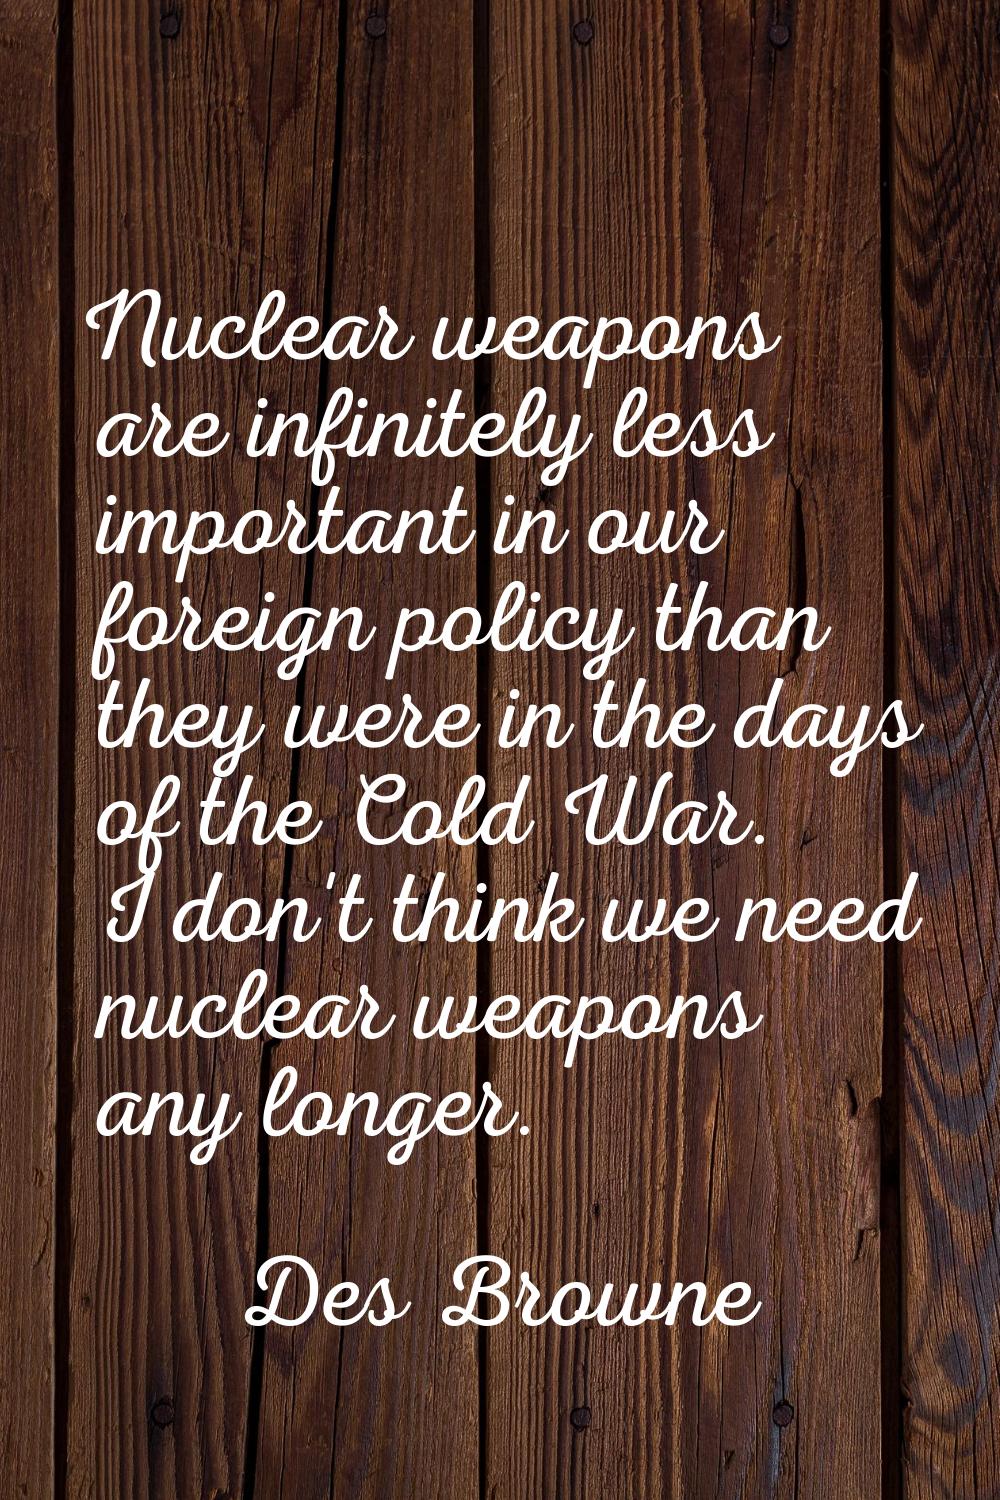 Nuclear weapons are infinitely less important in our foreign policy than they were in the days of t